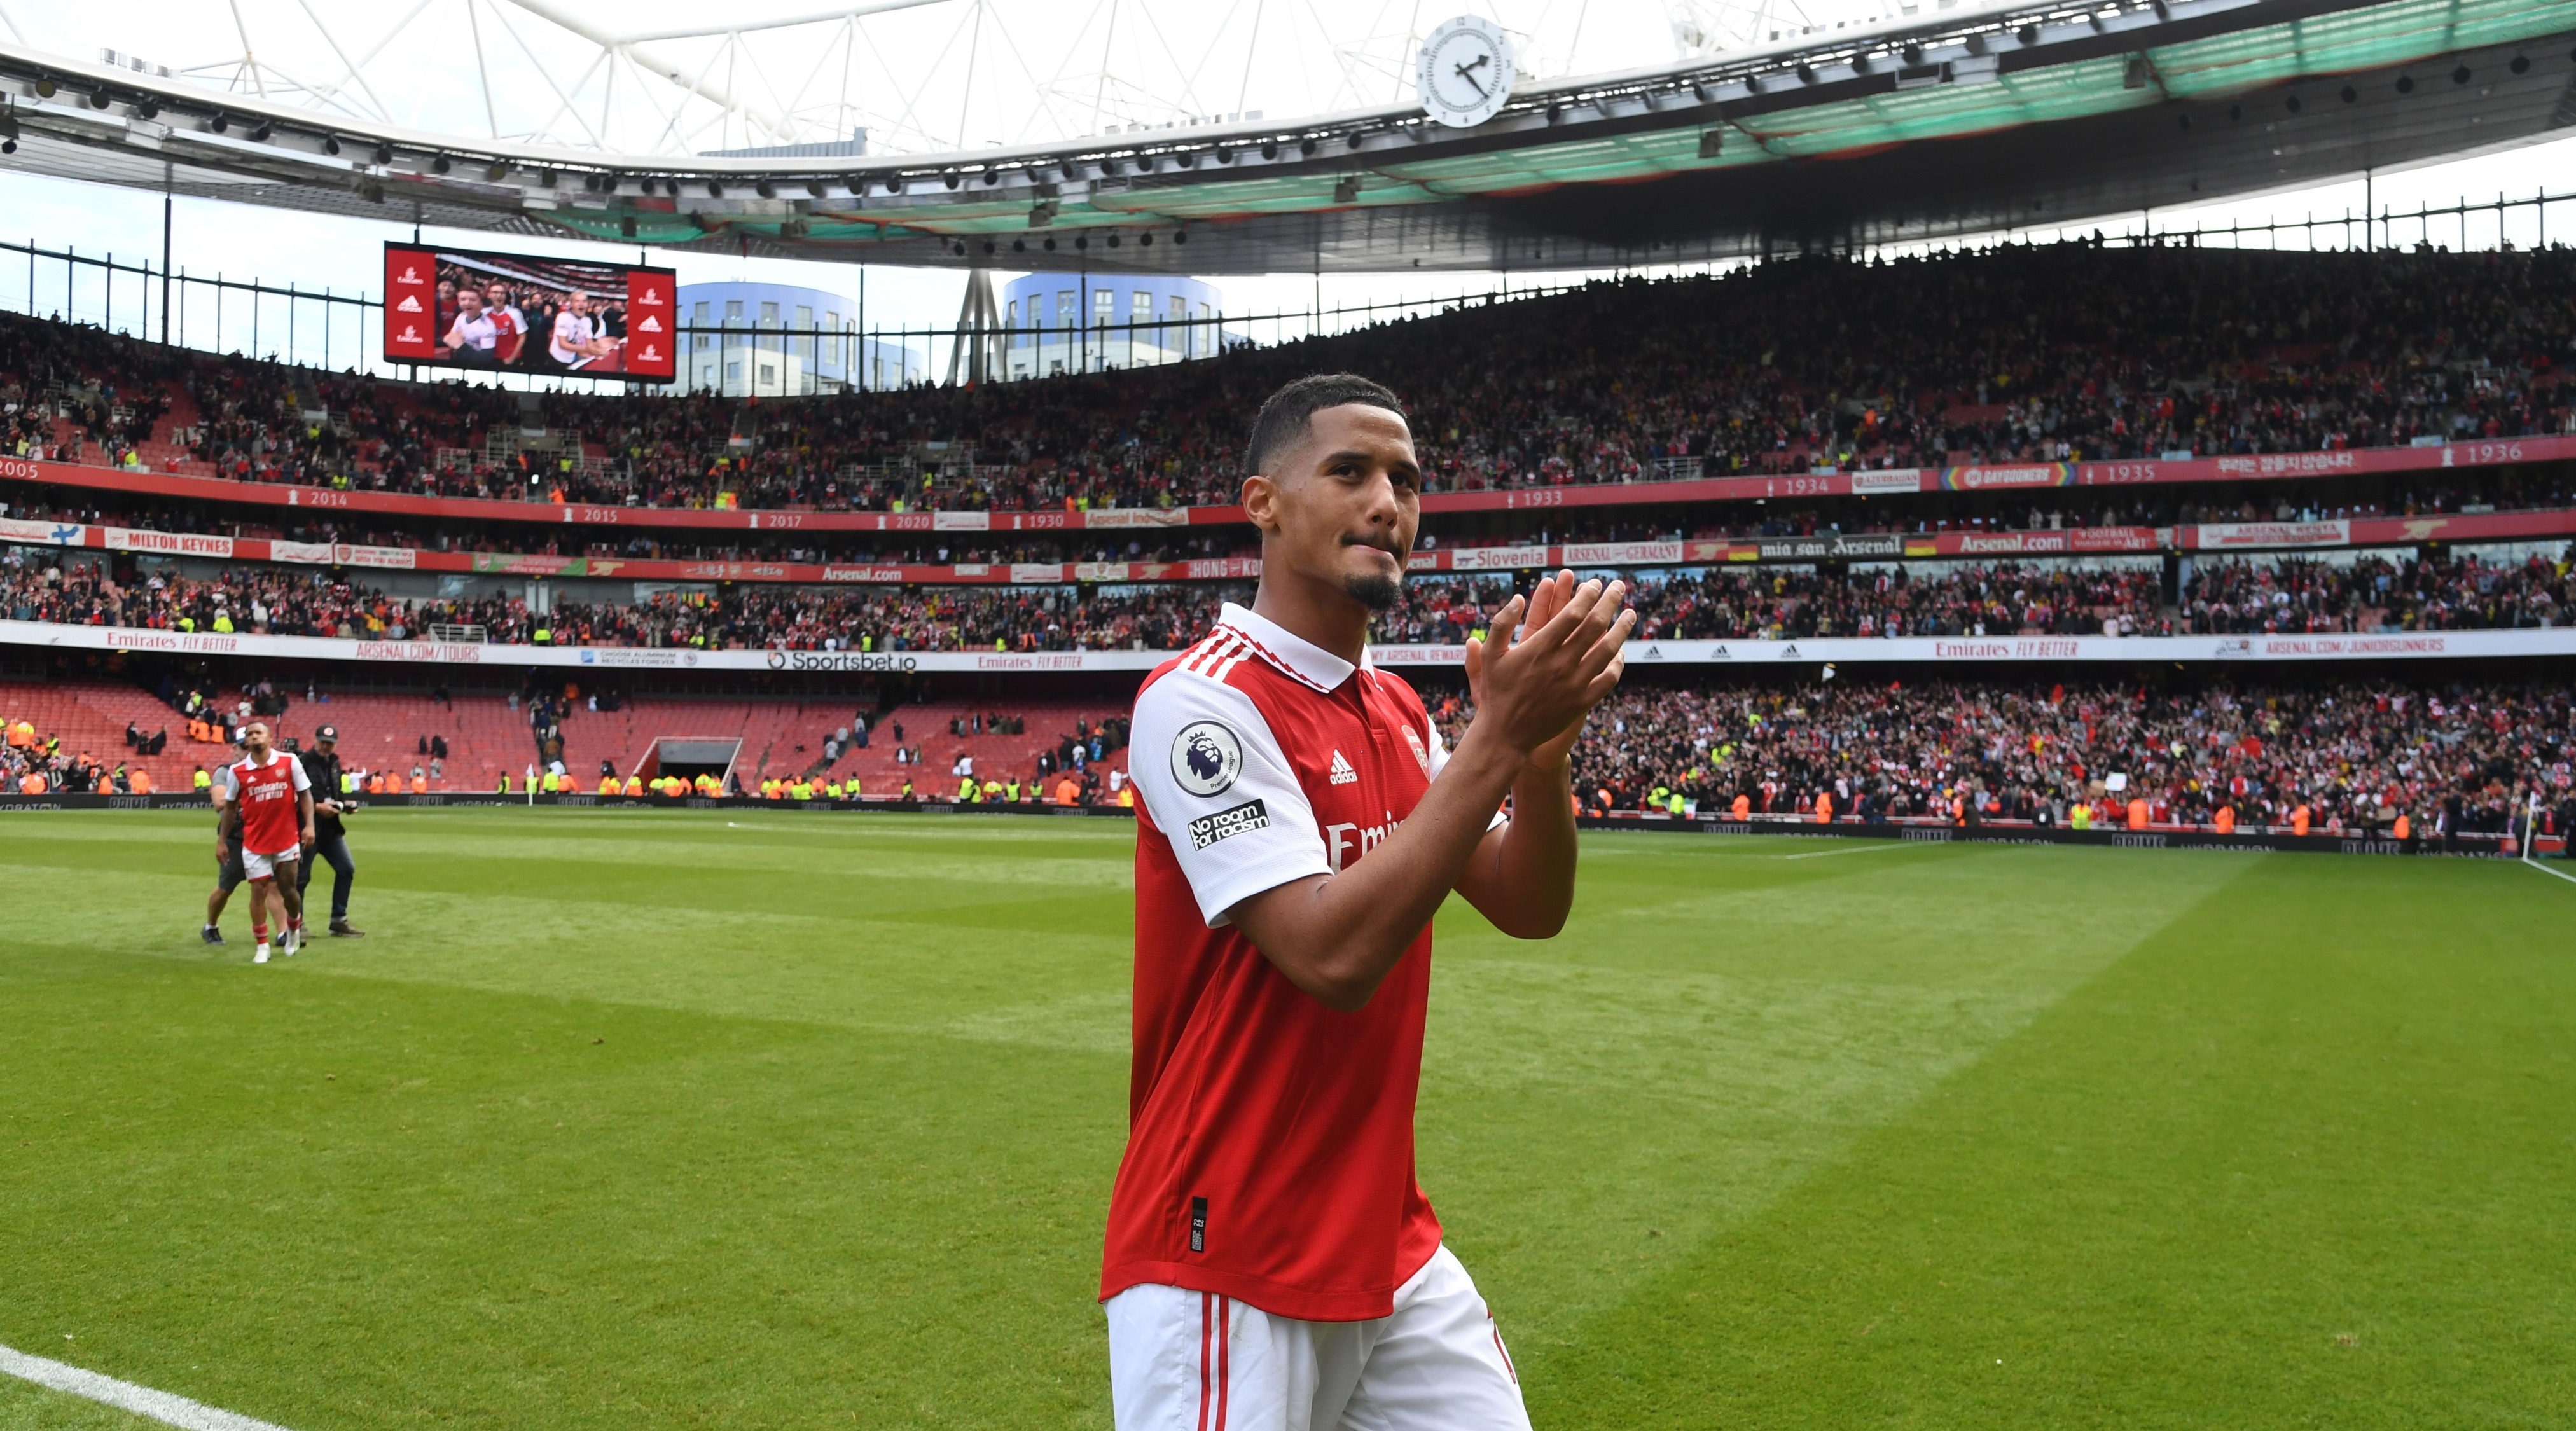 Arsenal Defender William Saliba applauds the fans after the Premier League match between Arsenal and Tottenham Hotspur on October 1, 2022 at Emirates Stadium in London, UK